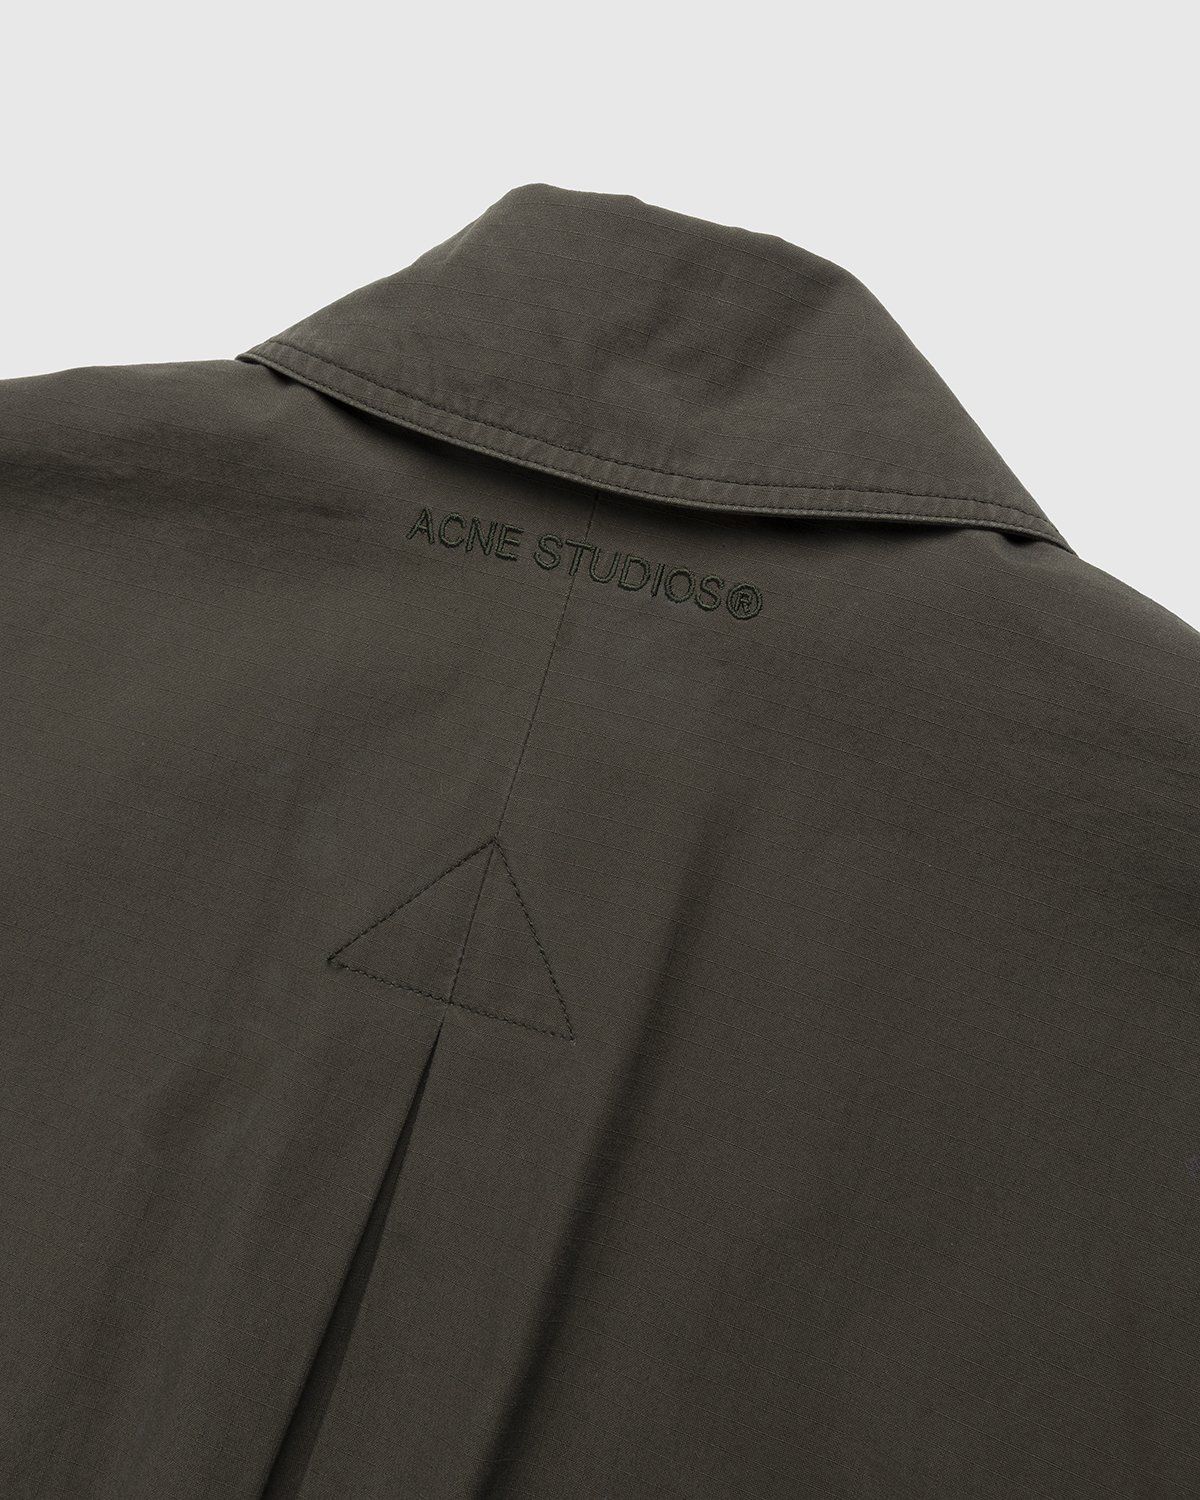 Acne Studios – Trench Coat Dark Olive - Outerwear - Green - Image 4